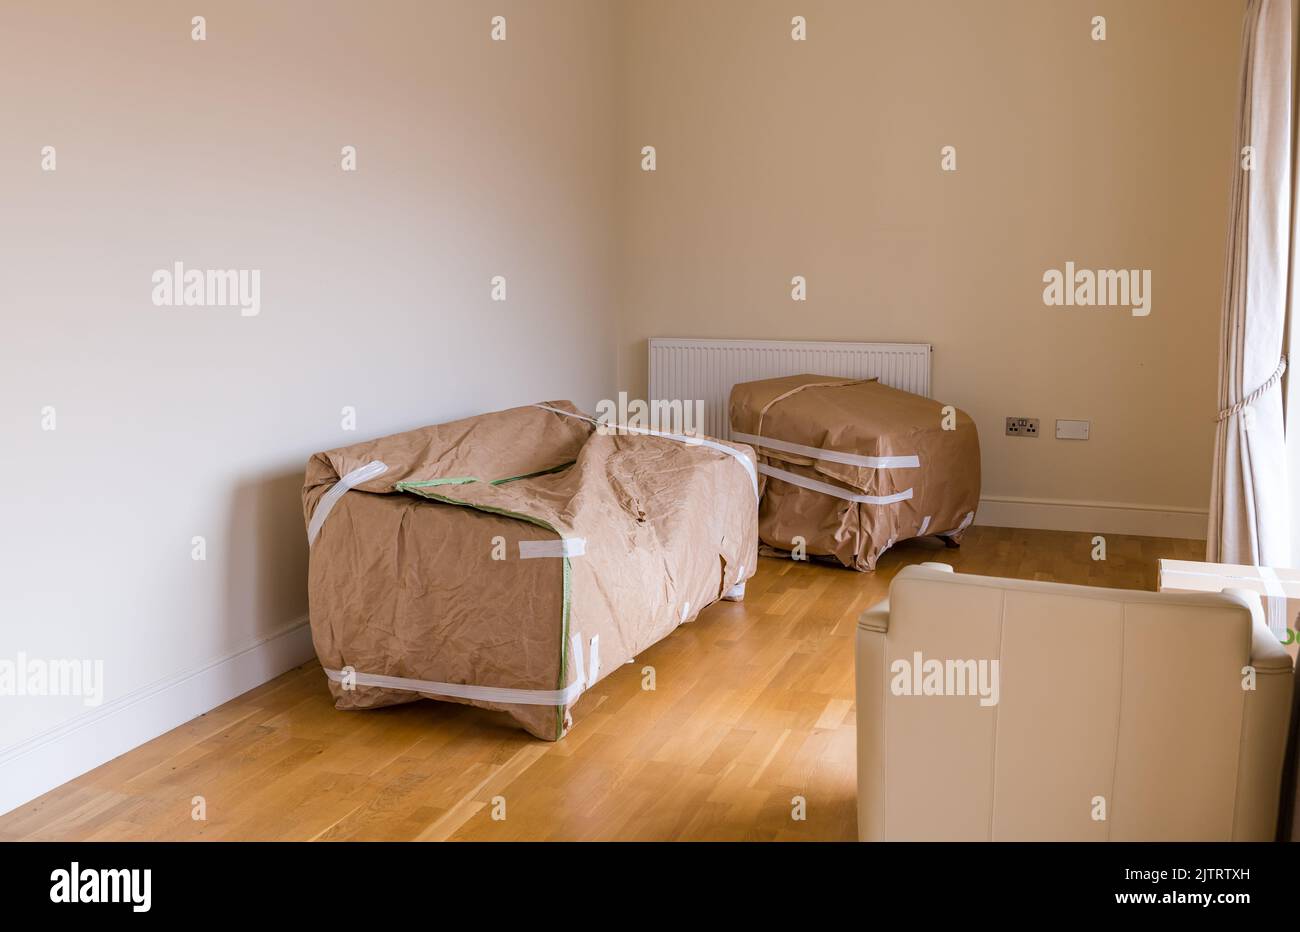 Packing and moving house with sofa and armchair furniture wrapped in sitting room packed ready for removals, Scotland, UK Stock Photo